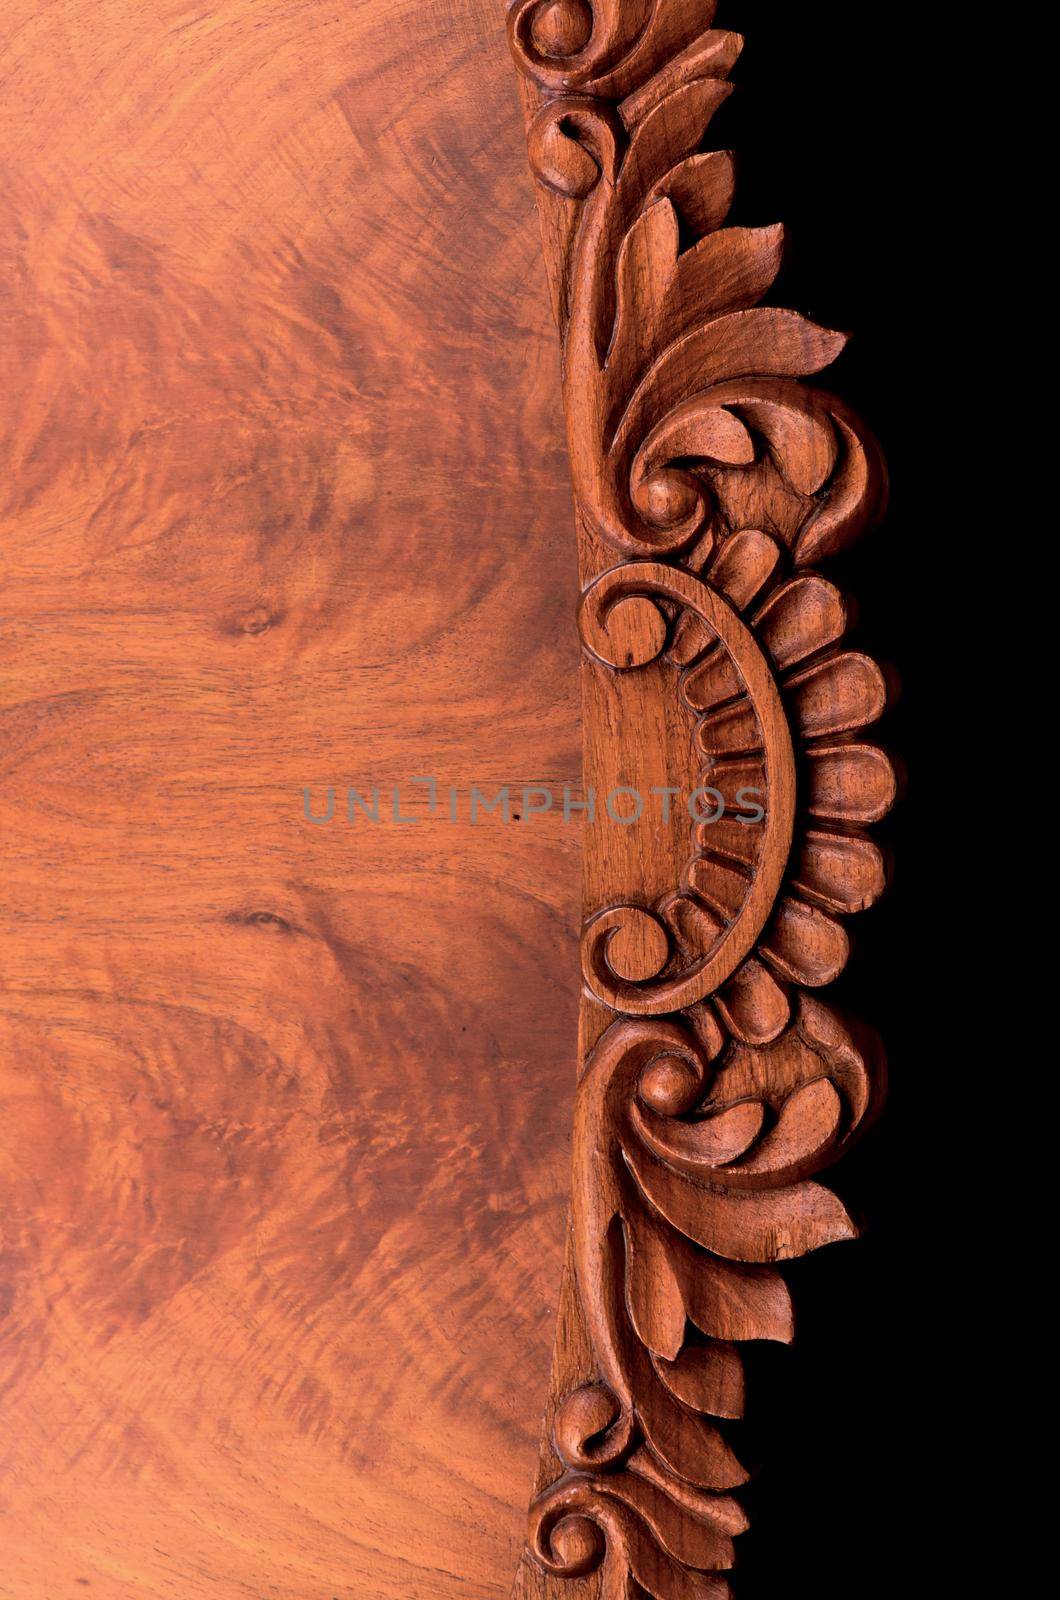 element of carved antique furniture. abstract brown wood background by aprilphoto